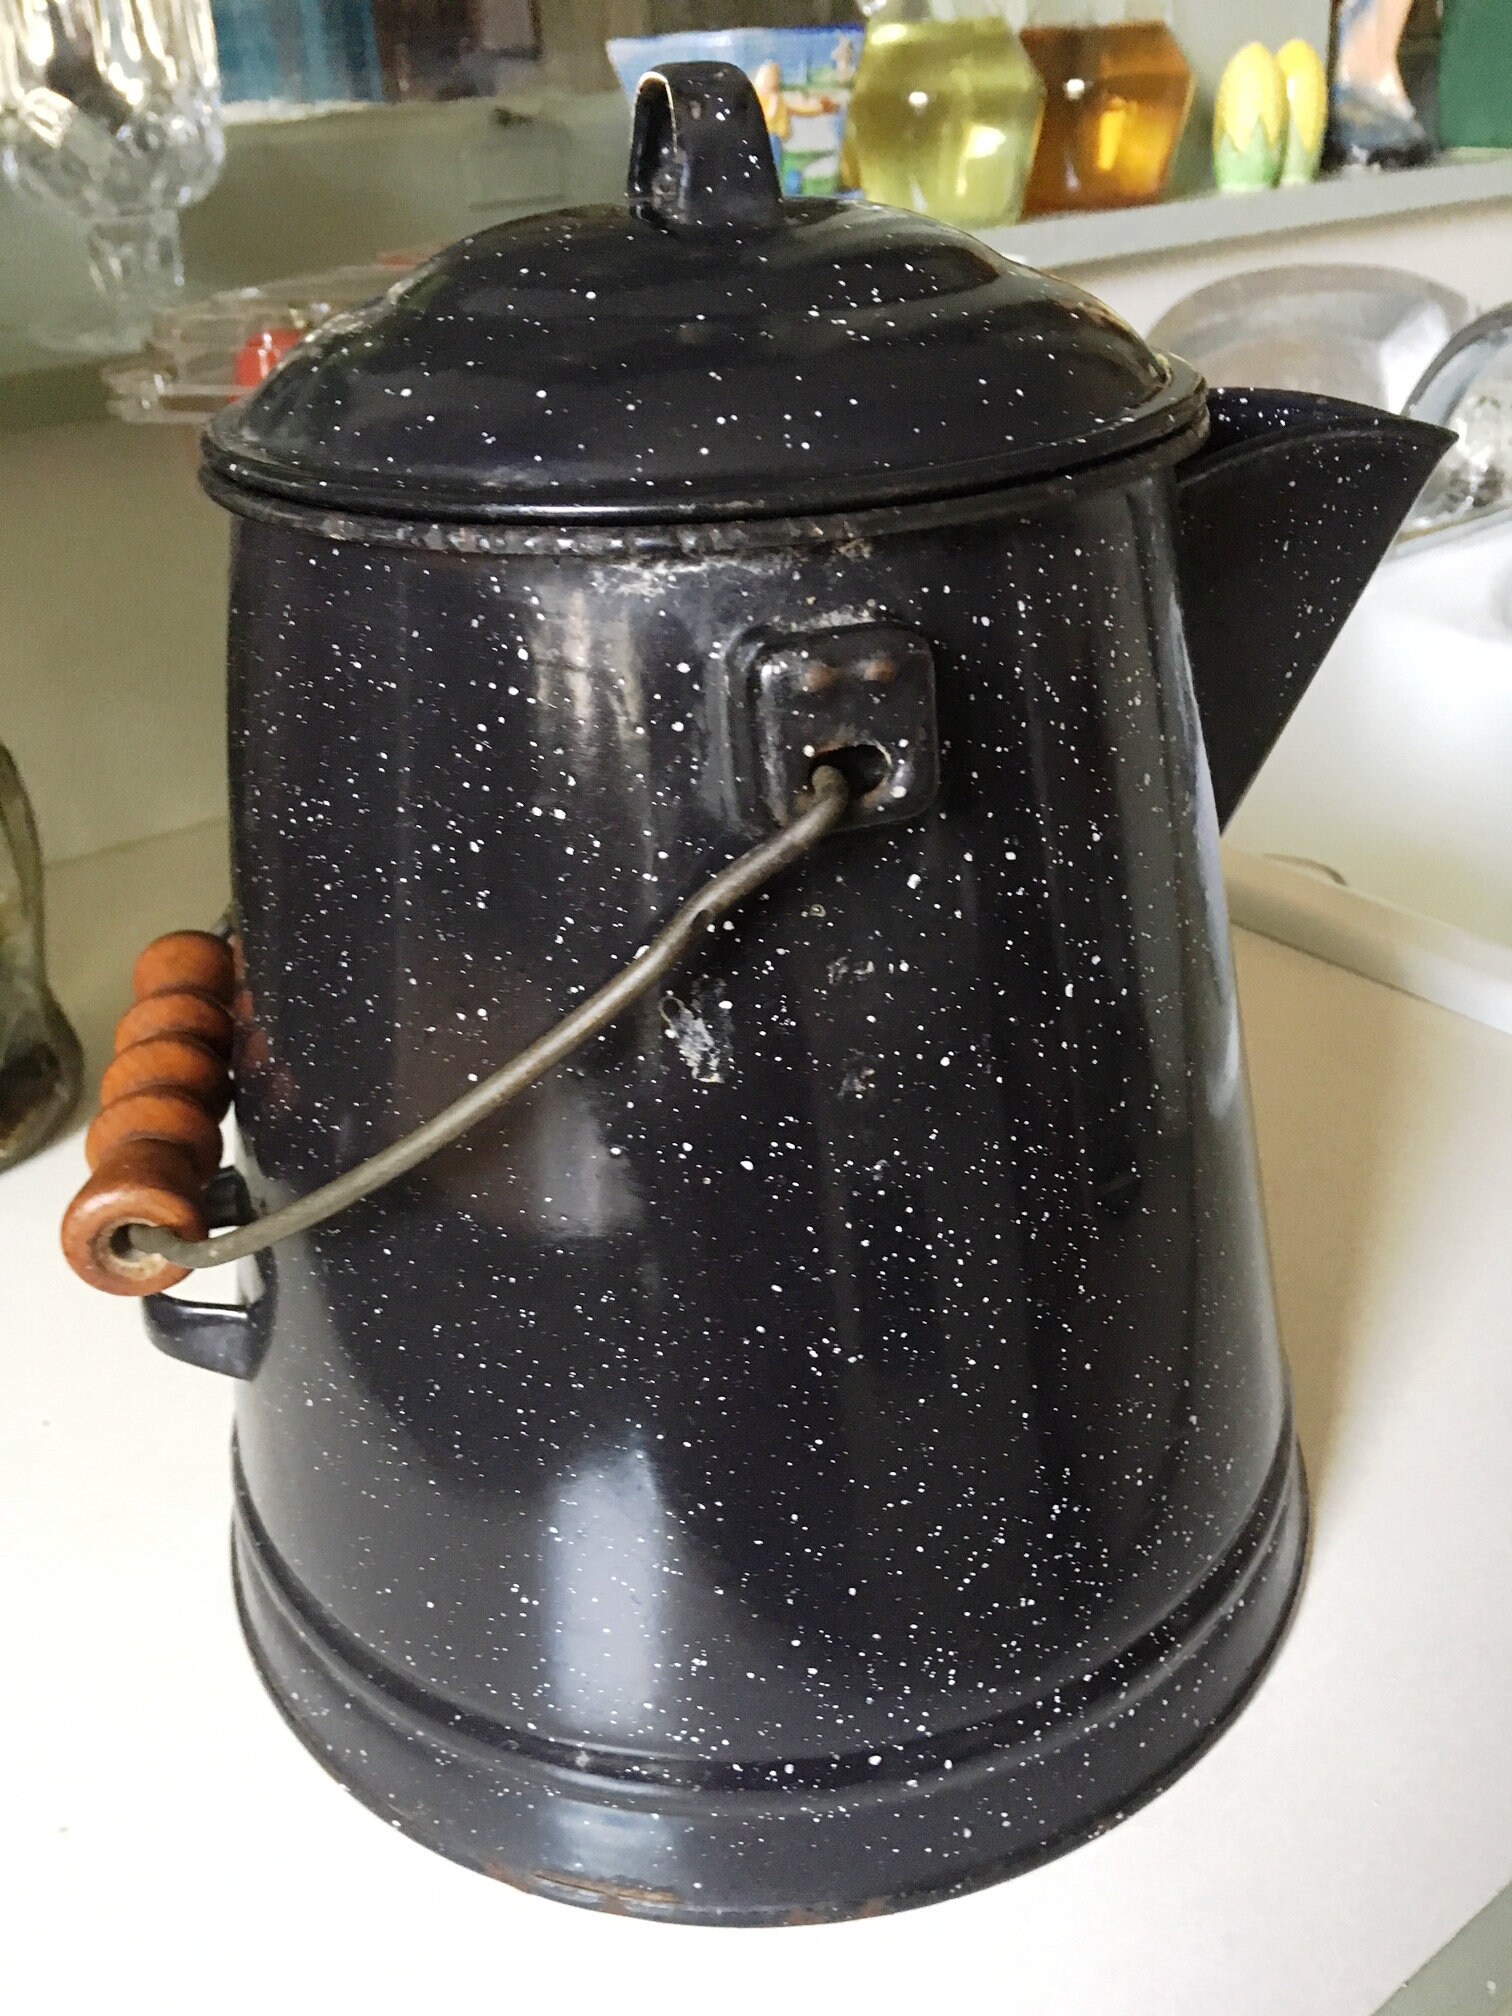 Vintage Granite Ware Coffee Pot With Fire Marks From Being Used